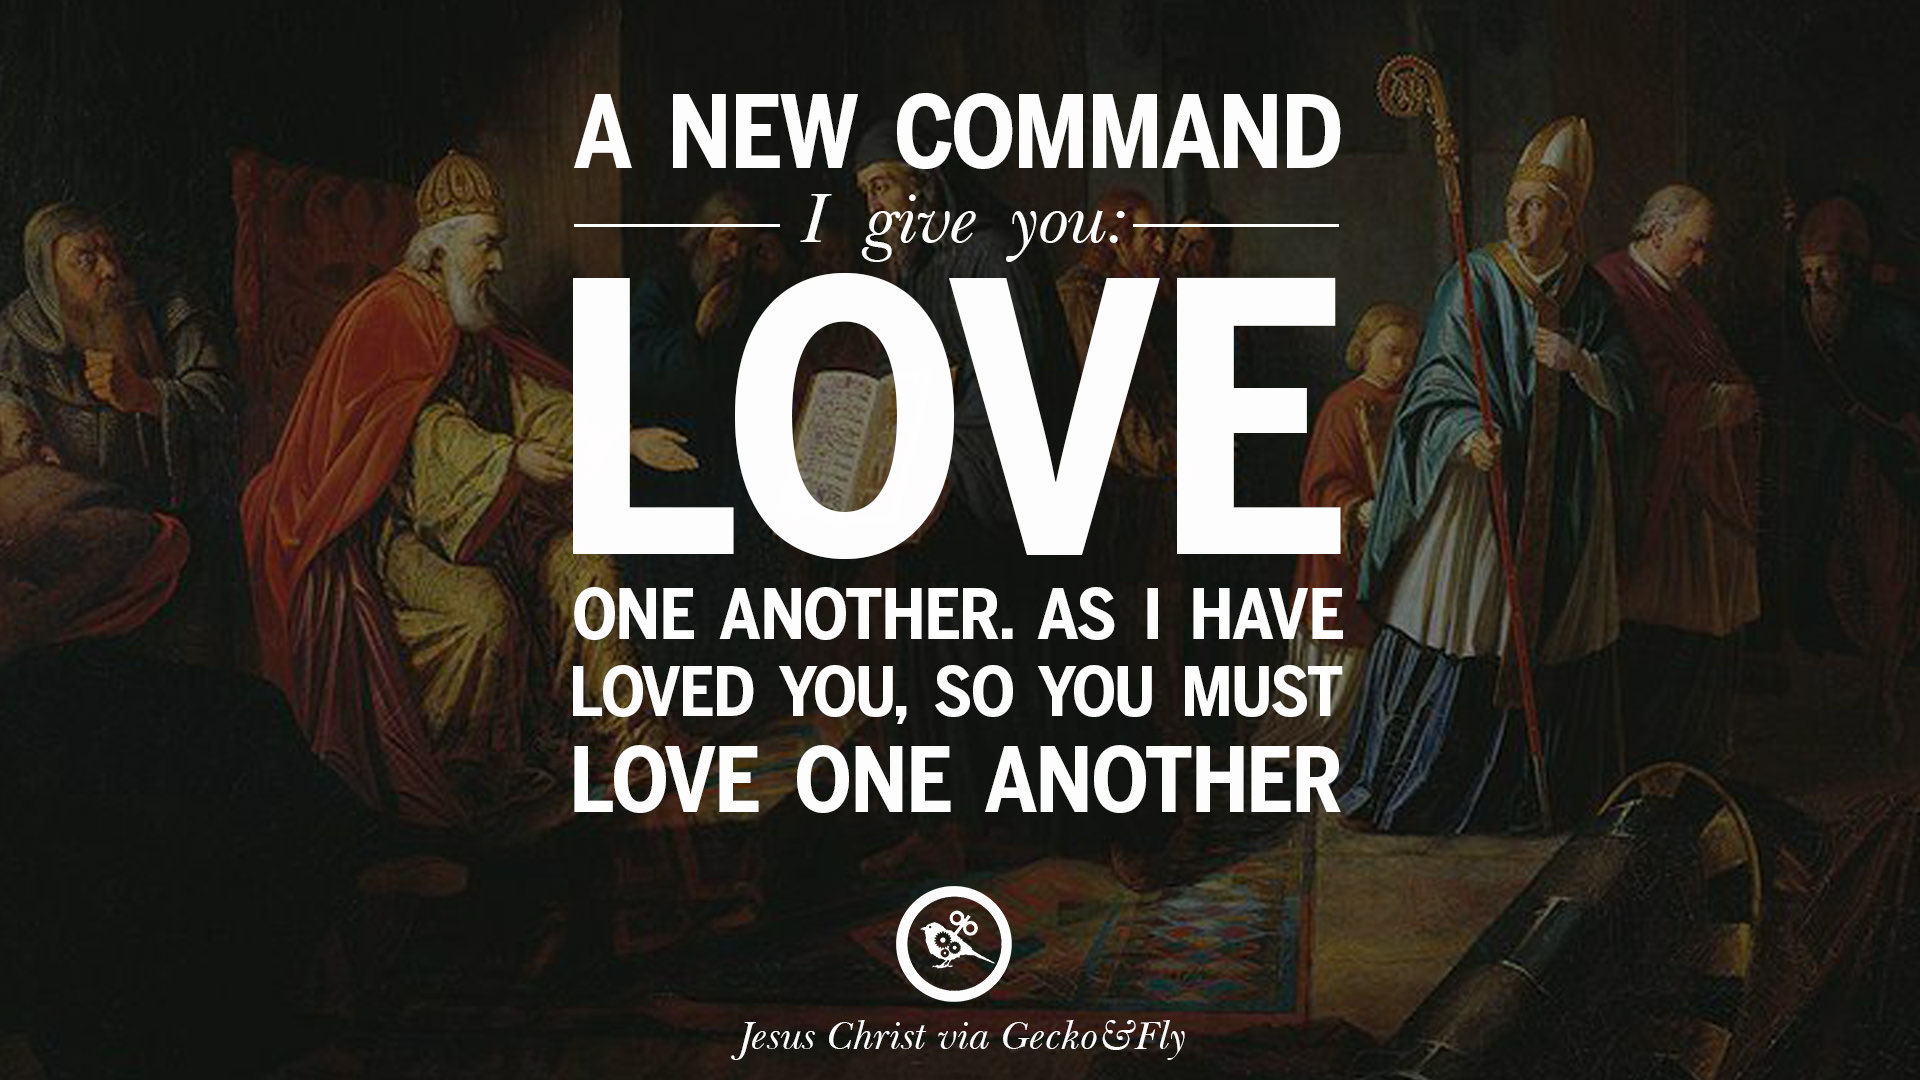 A new mand I gave you Love one another As I have loved you so you must love one another – Jesus Christ